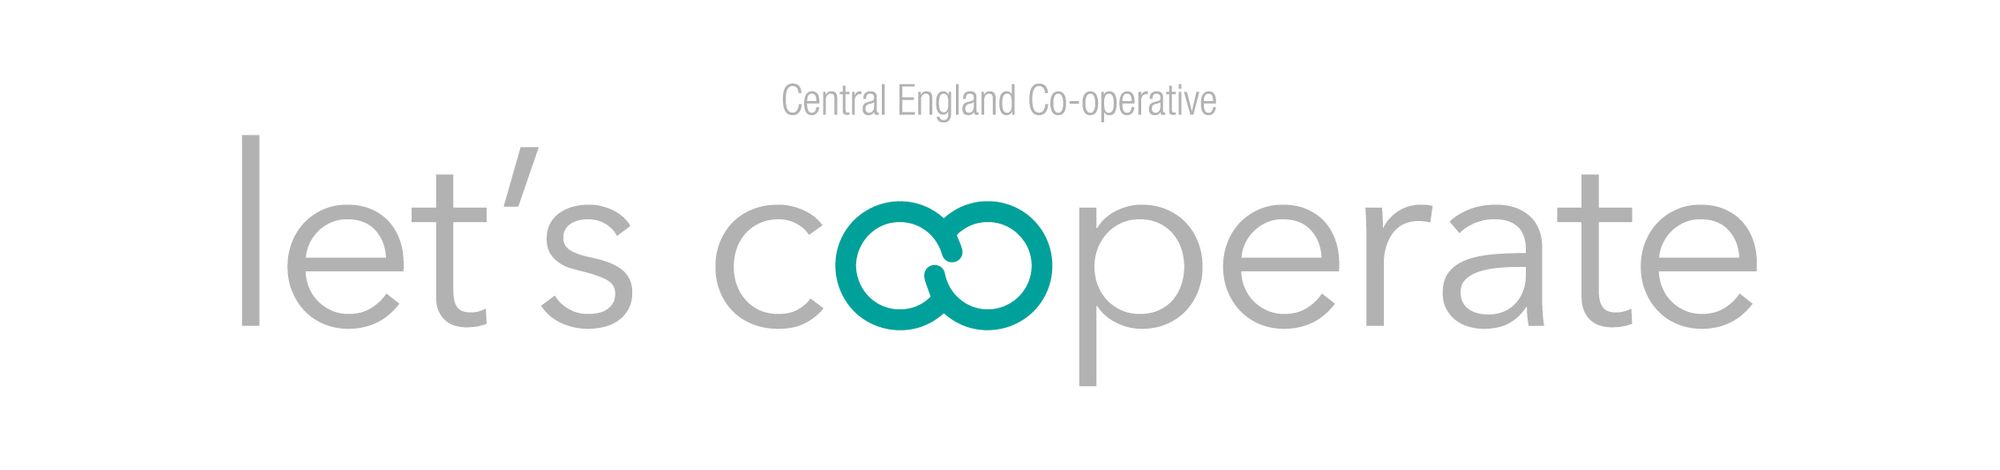 Let's Co-operate with Central England Co-operative